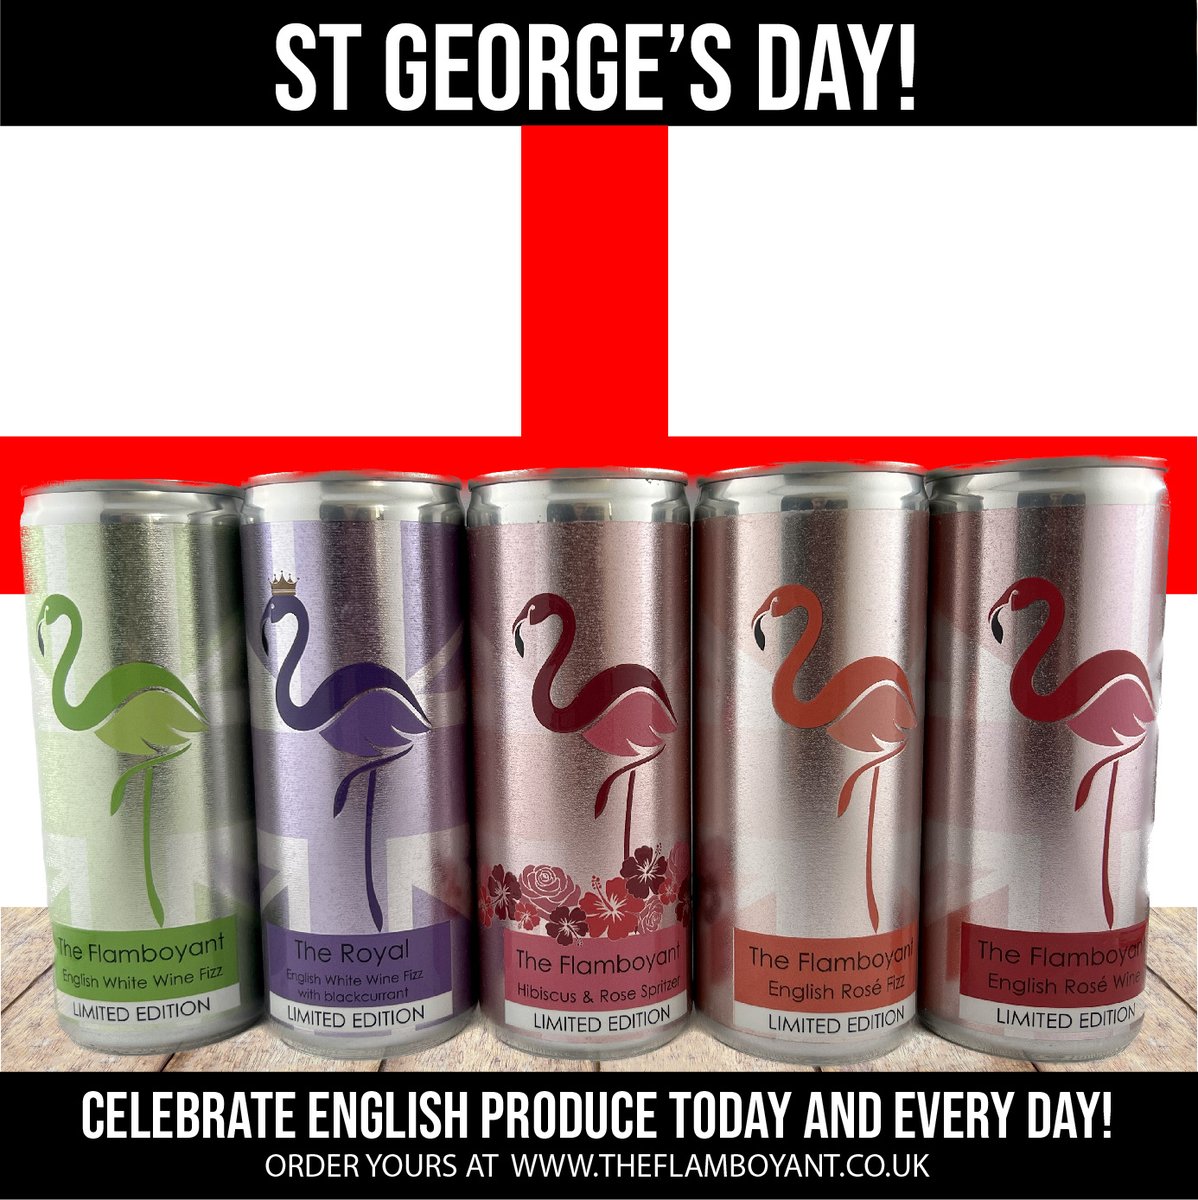 Join us in celebrating #StGeorgesDay 
We are proud of our #EnglishWine and all English producers. Cheers 🥂#ShopLocal #LowFoodMiles #SustainableLiving #CannedWine #MadeinEngland